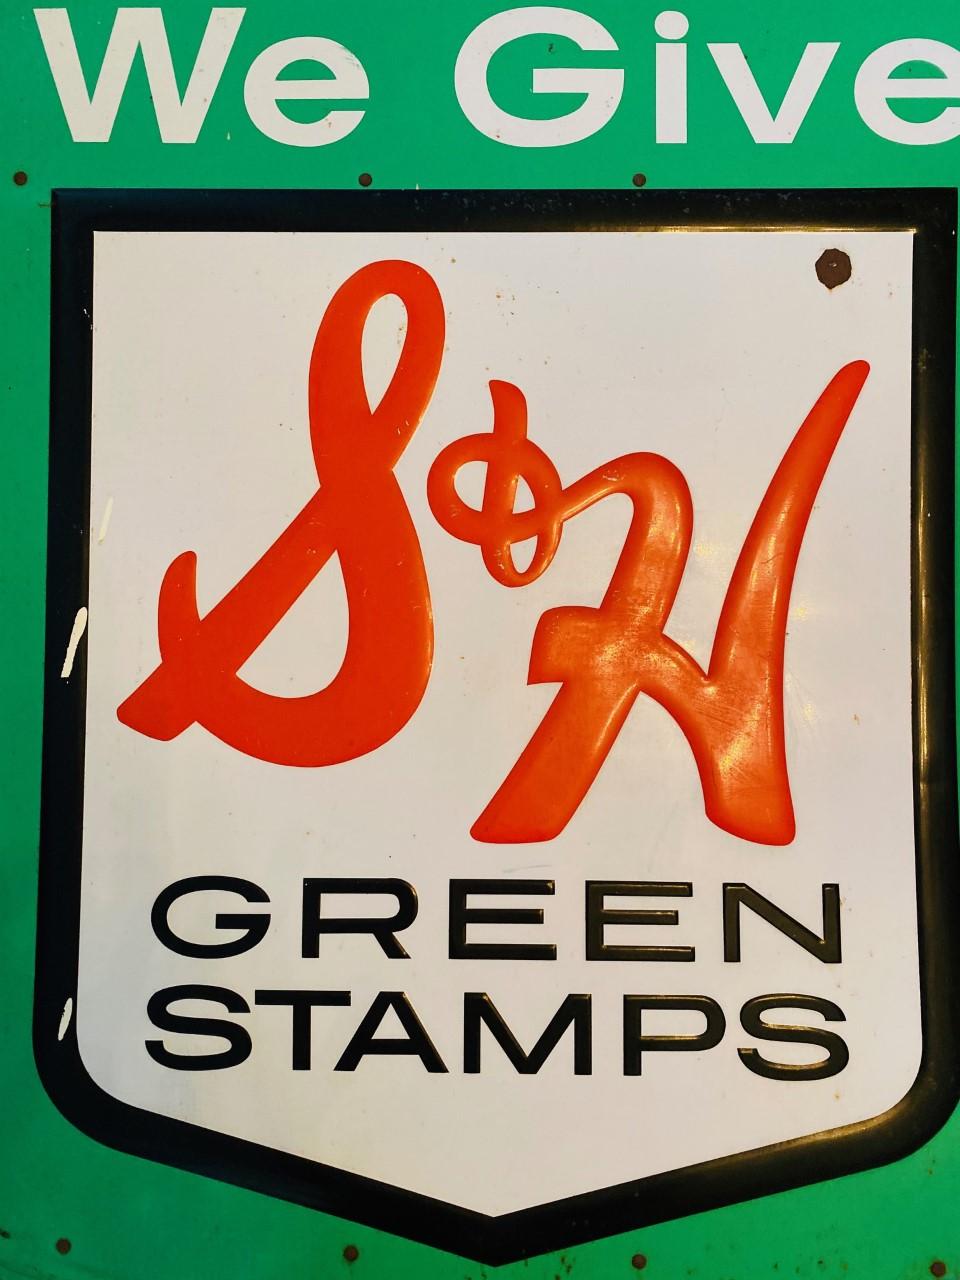 Details about   TIN SIGN S & H Green Stamps Rustic Metal Décor Art Kitchen Store Shop A978 